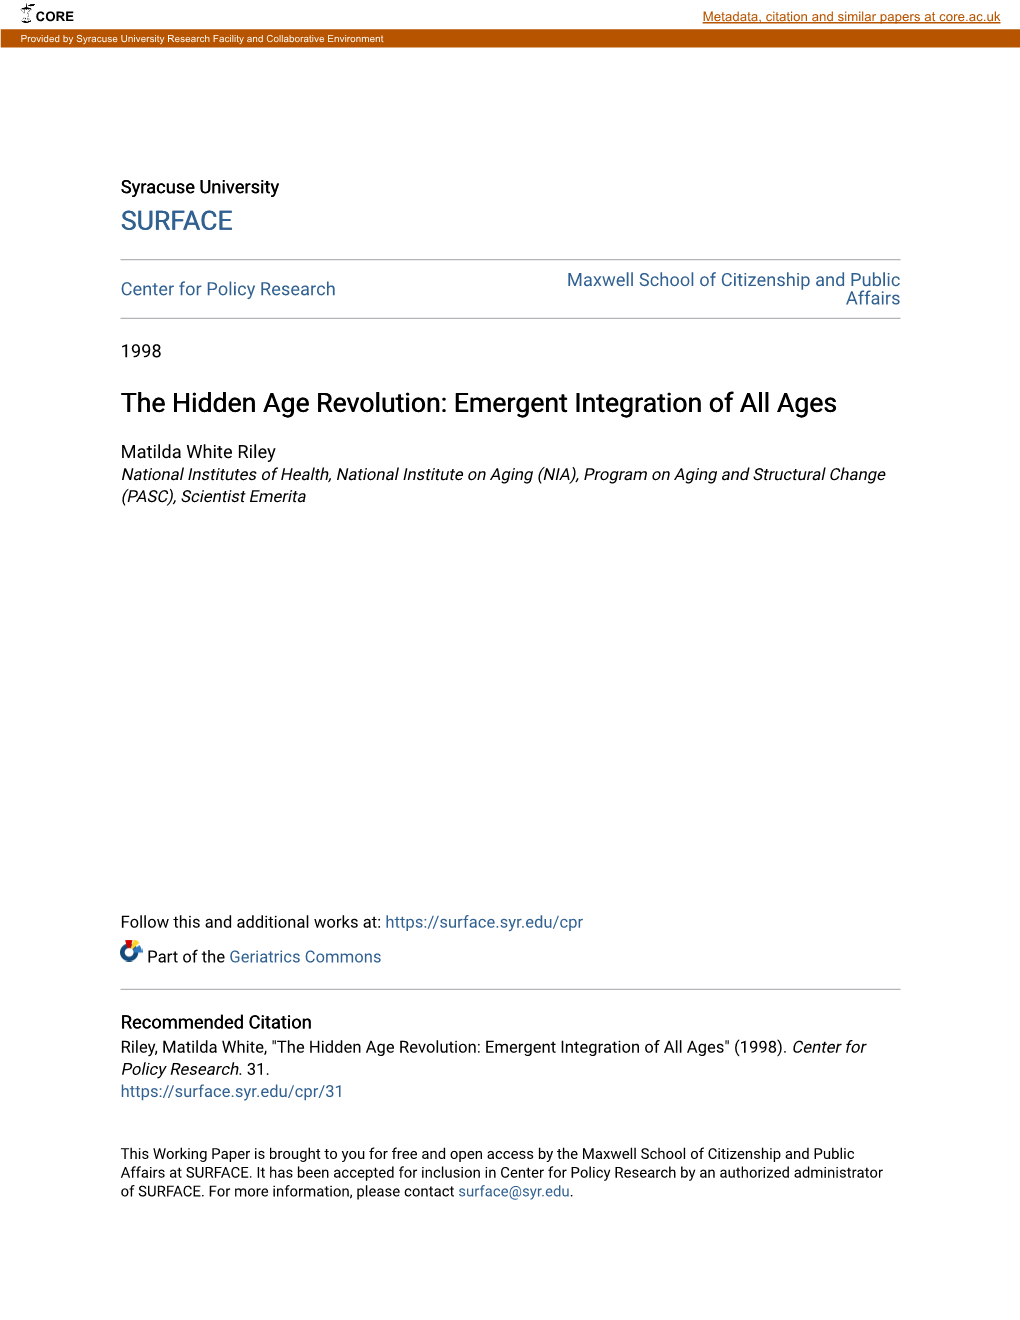 The Hidden Age Revolution: Emergent Integration of All Ages